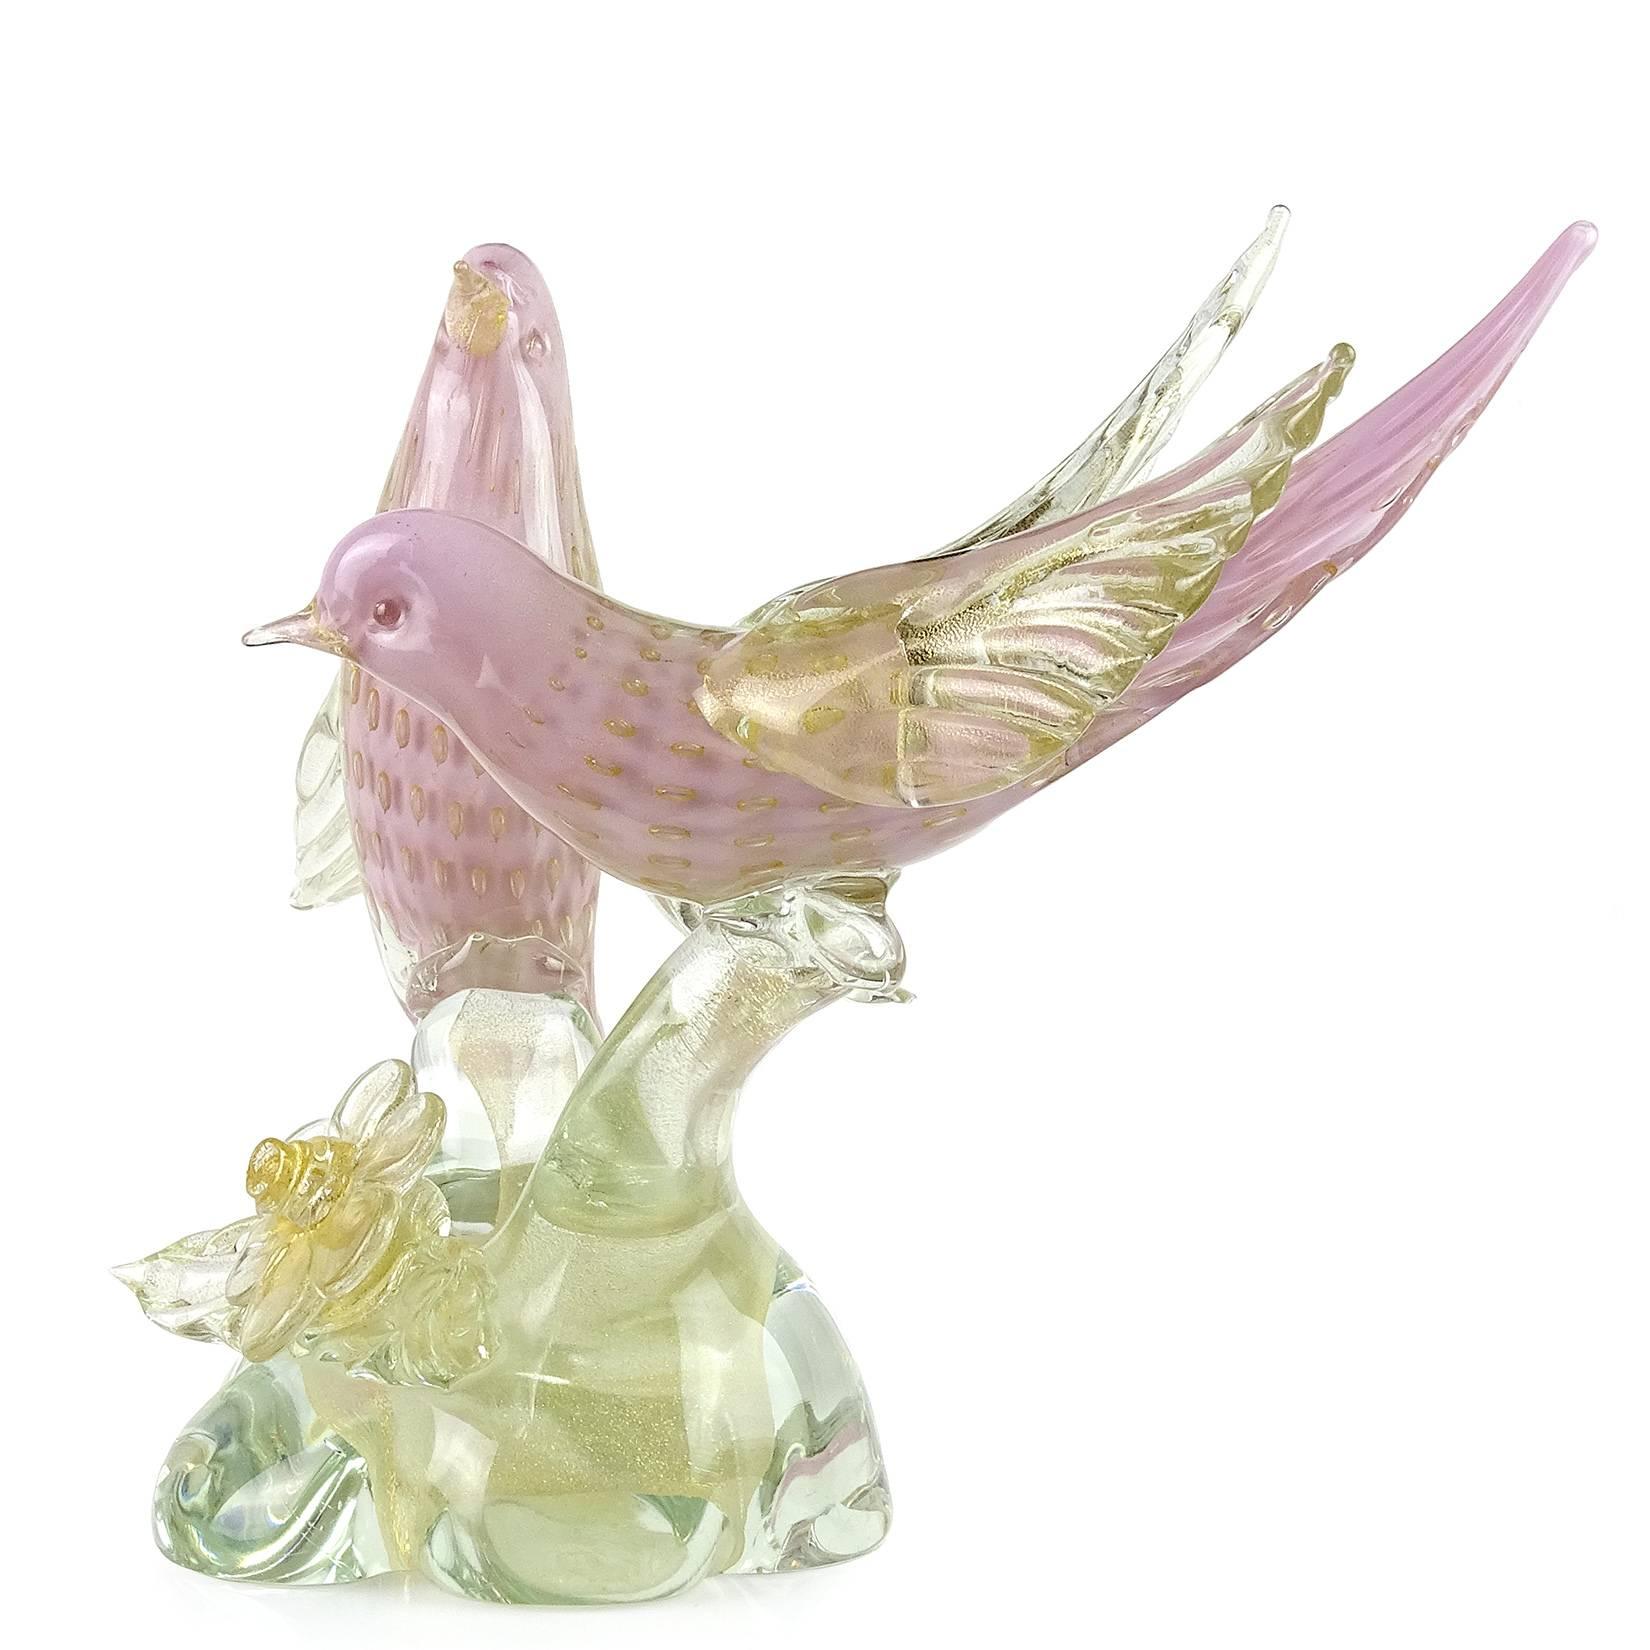 Beautiful large Murano handblown pink, controlled bubbles and gold flecks Italian art glass courting birds sculpture. Attributed to designer Alfredo Barbini, circa 1950s. The piece is very large, and profusely covered in gold leaf throughout the